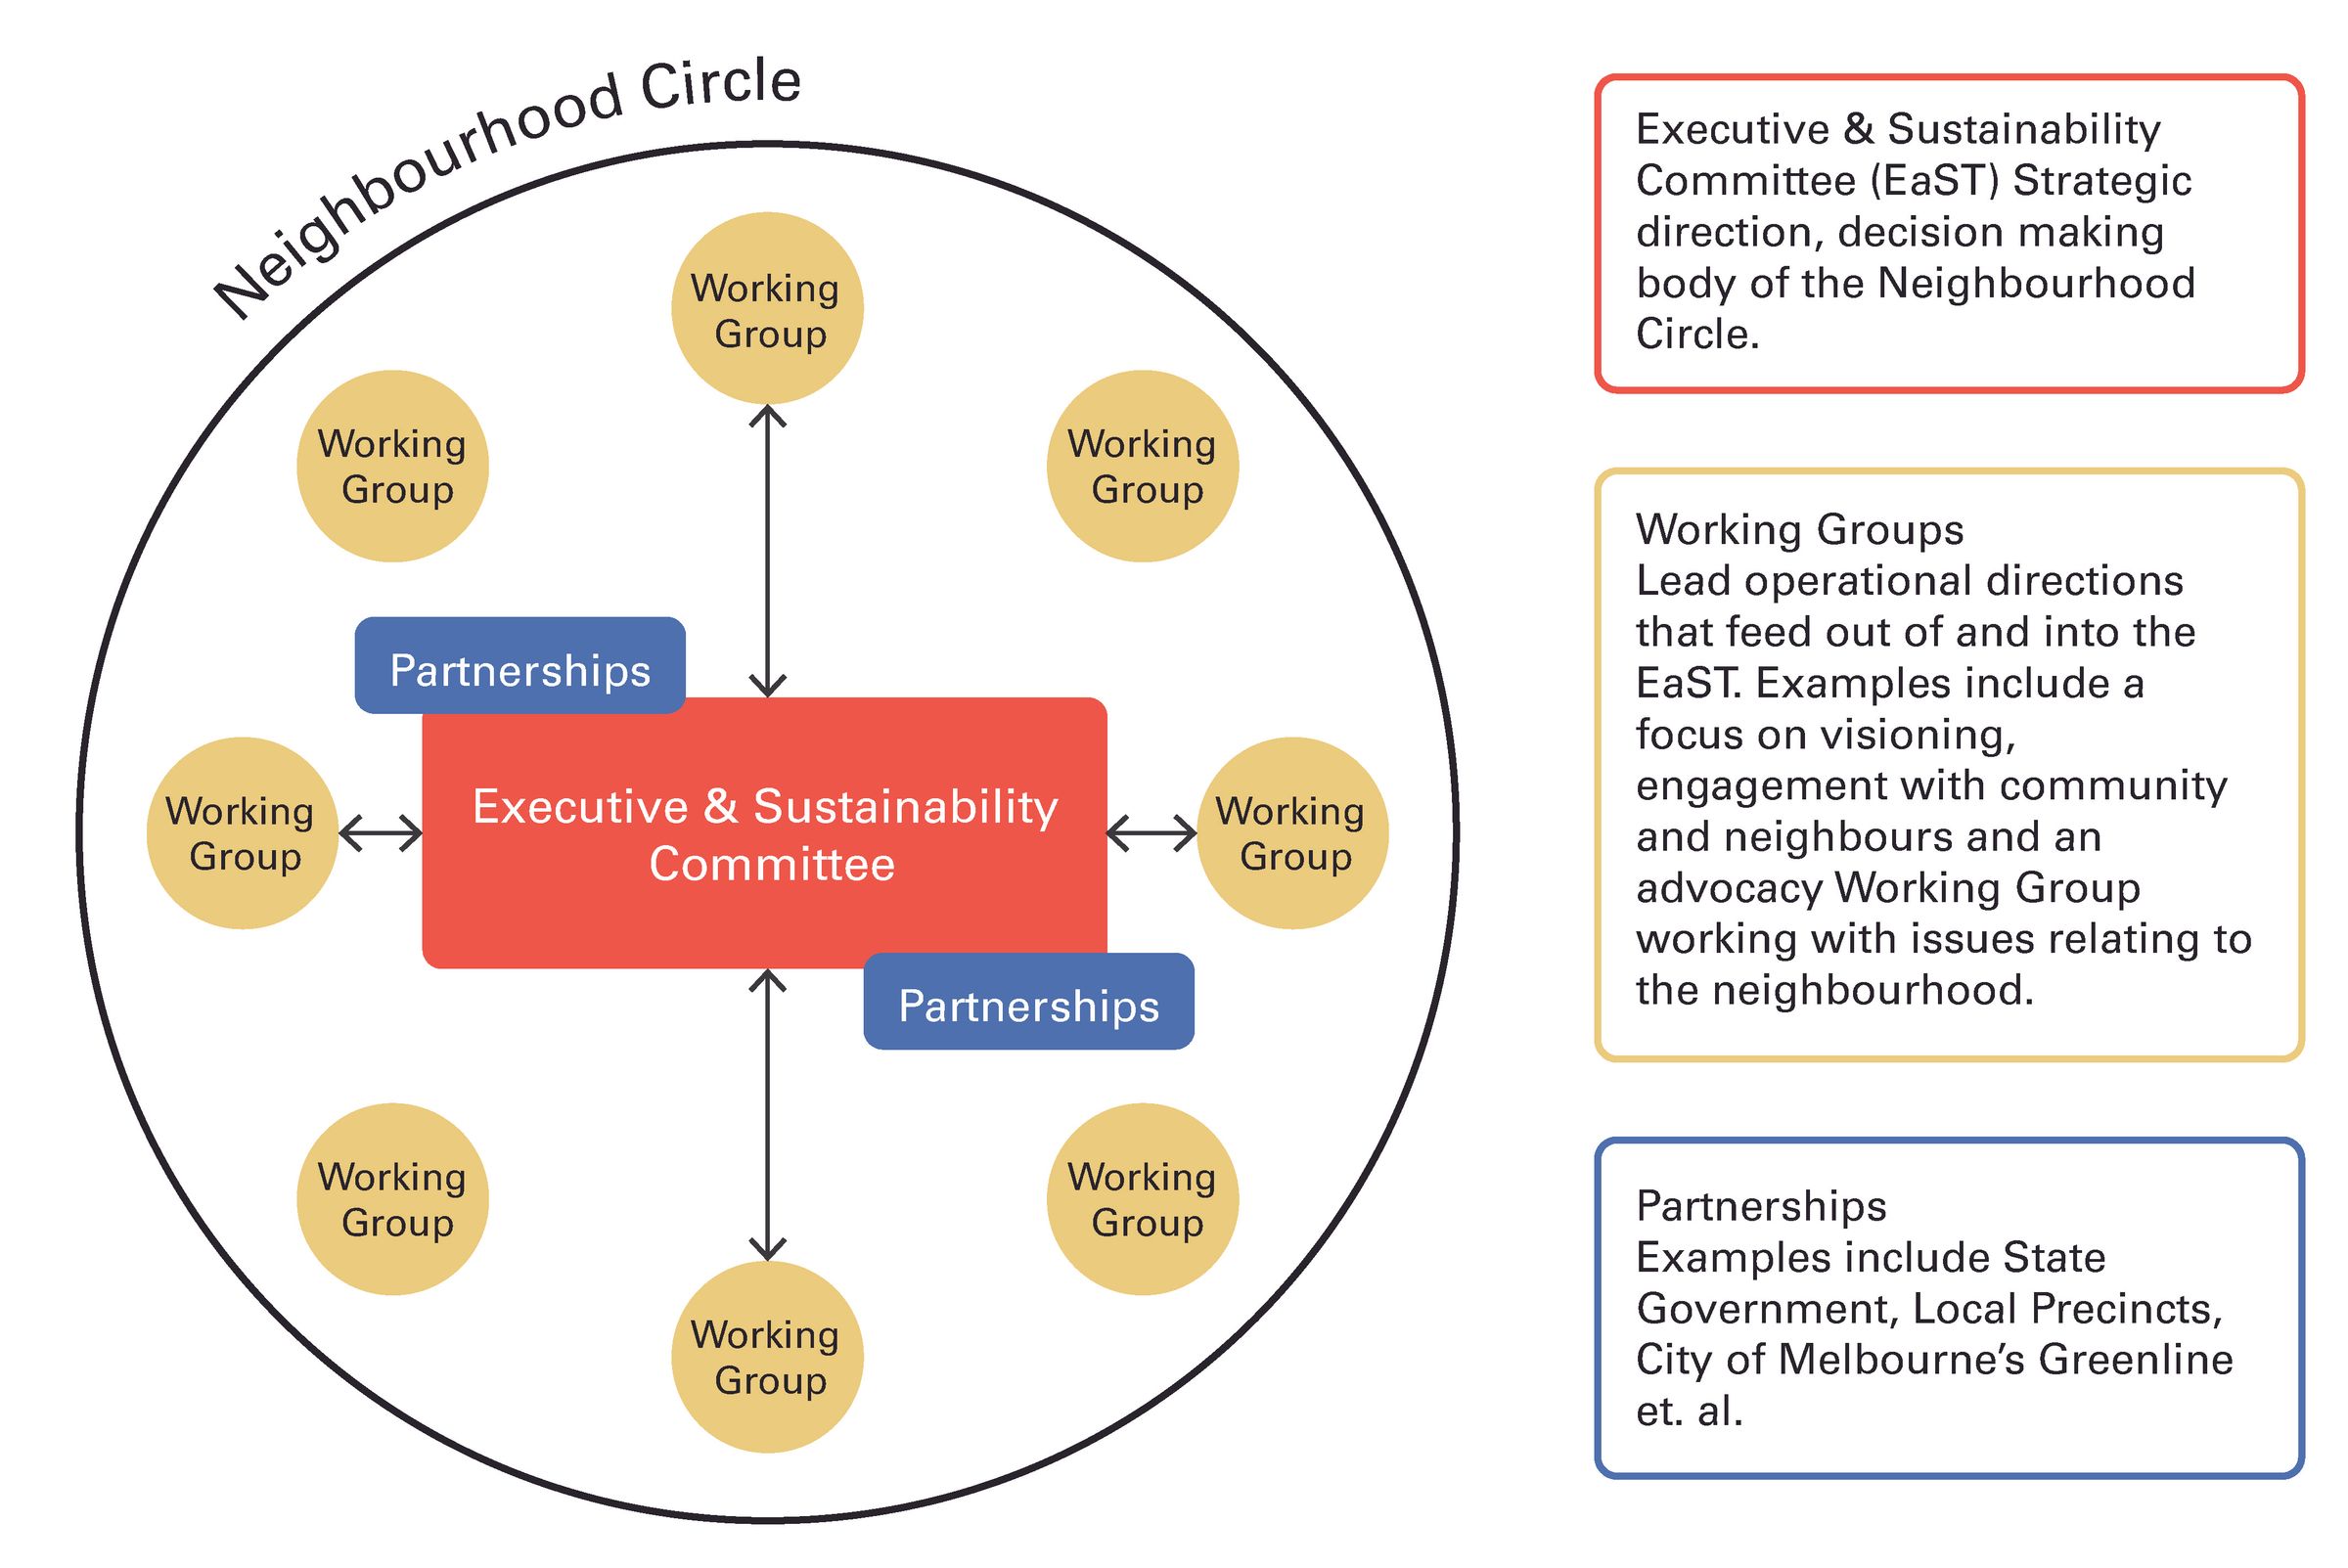 Diagram illustrating the Neighbourhood Circle Governance, with the Executive & Sustainability Committee at the centre with Partnerships linked to the committee and working groups as circles surrounding the Committee and Partnerships.